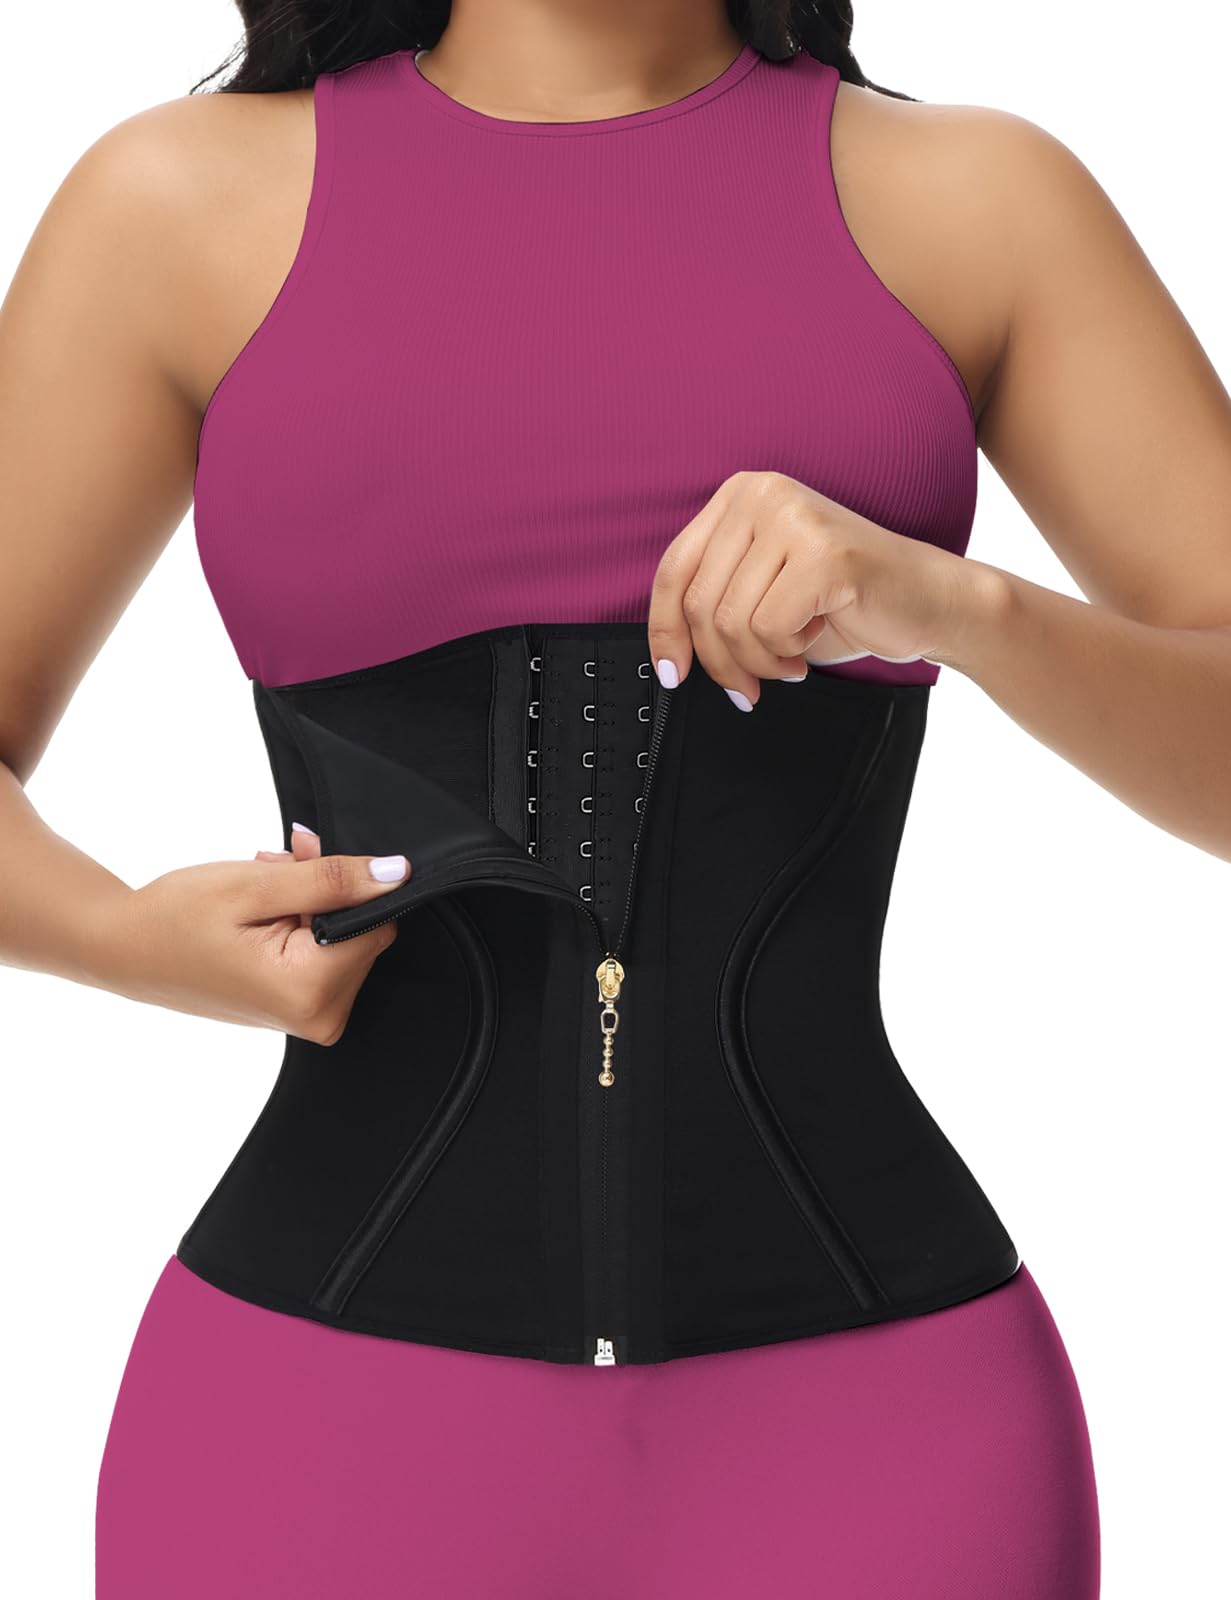 ChicCurve Deluxe Snatching Tummy Control Corset